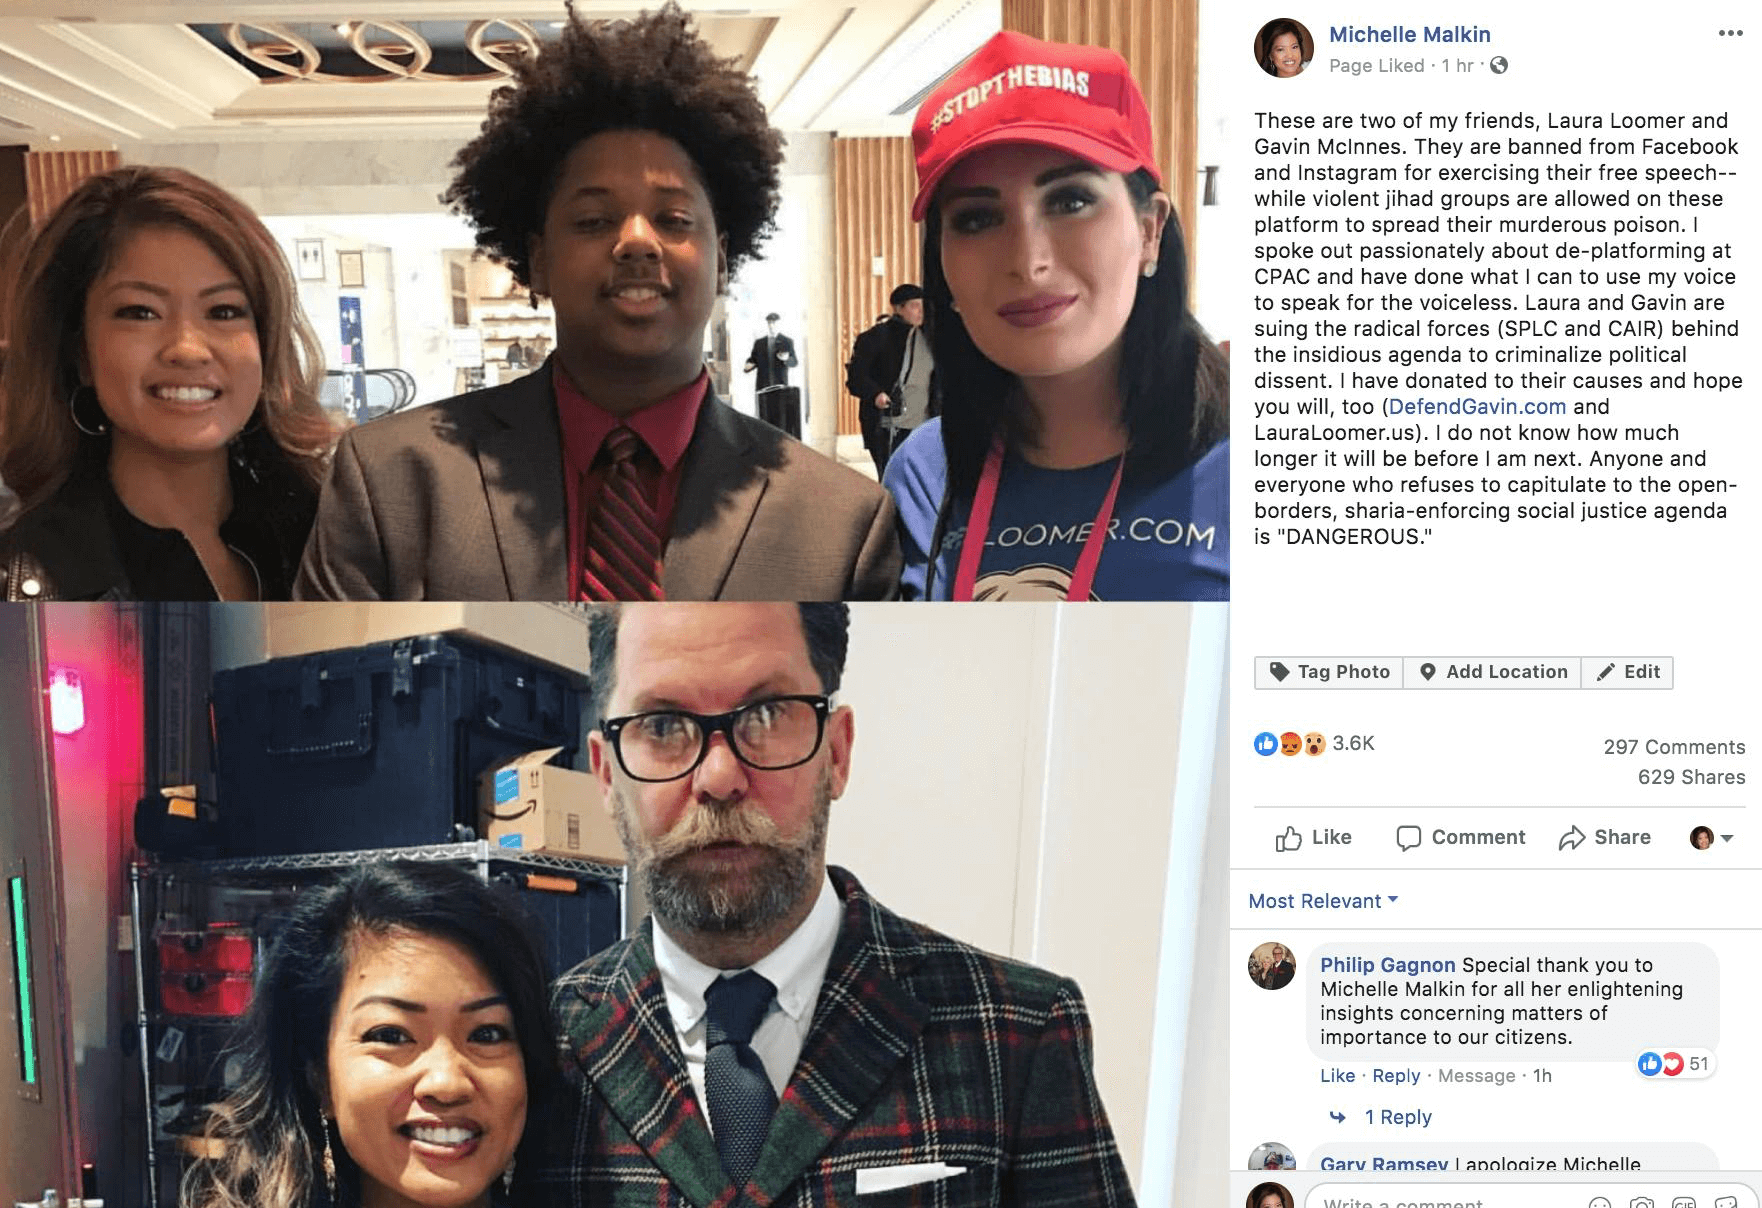 The photos of Laura Loomer and Gavin McInnes that Michelle Malkin posted to Facebook.